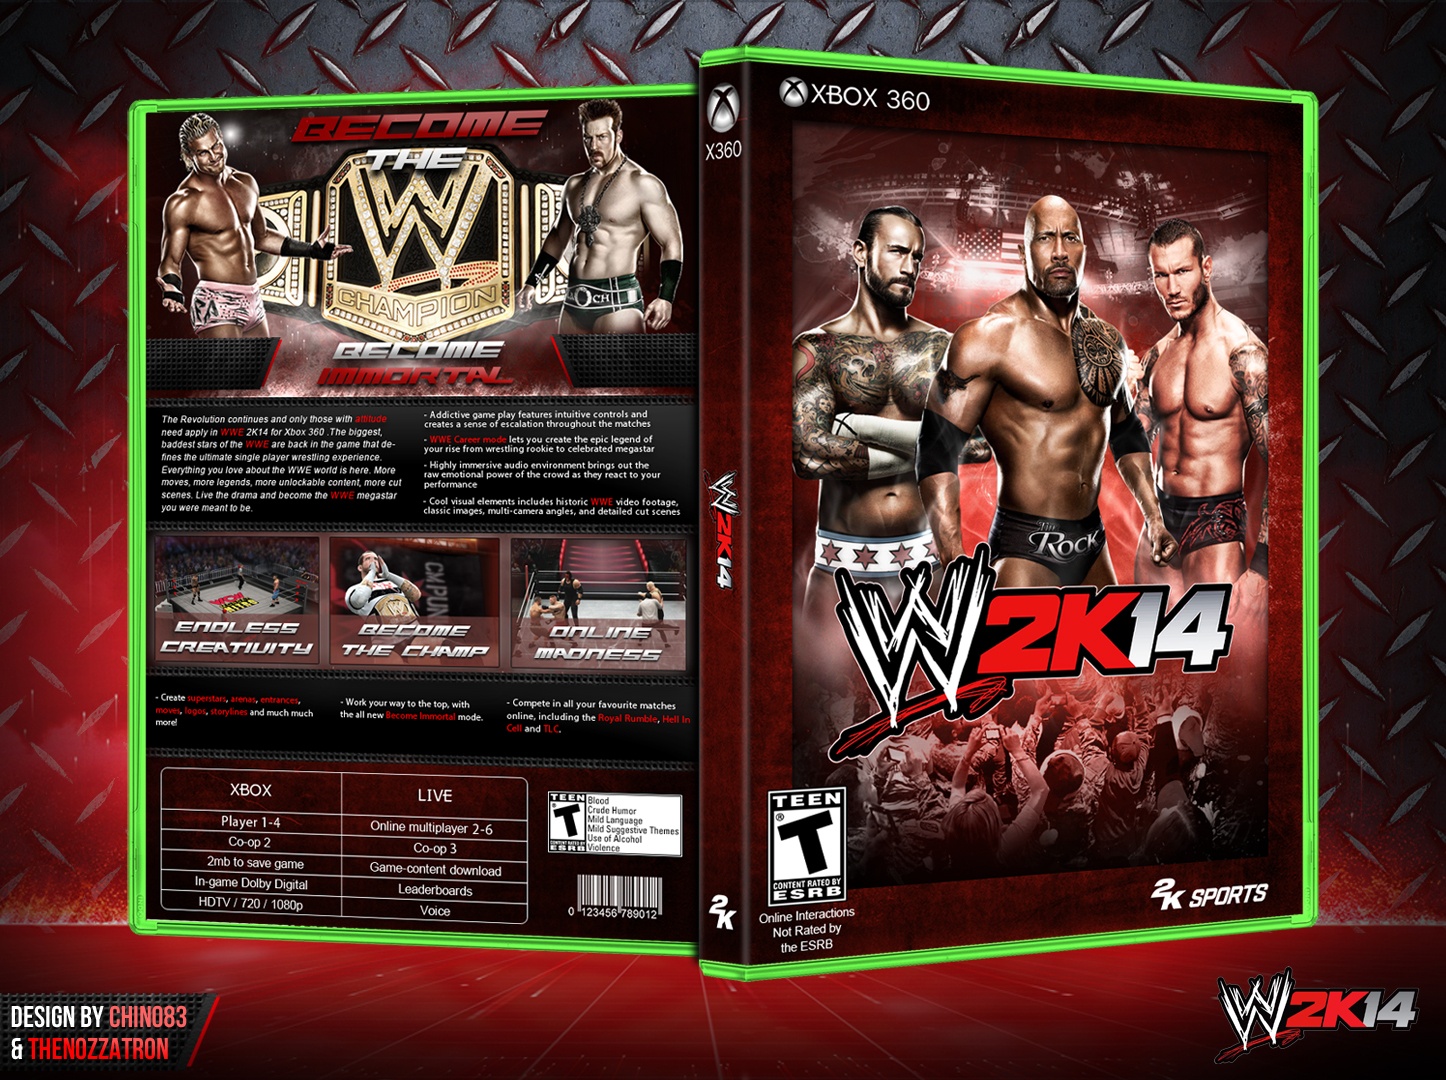 Viewing full size WWE 2K14 box cover.